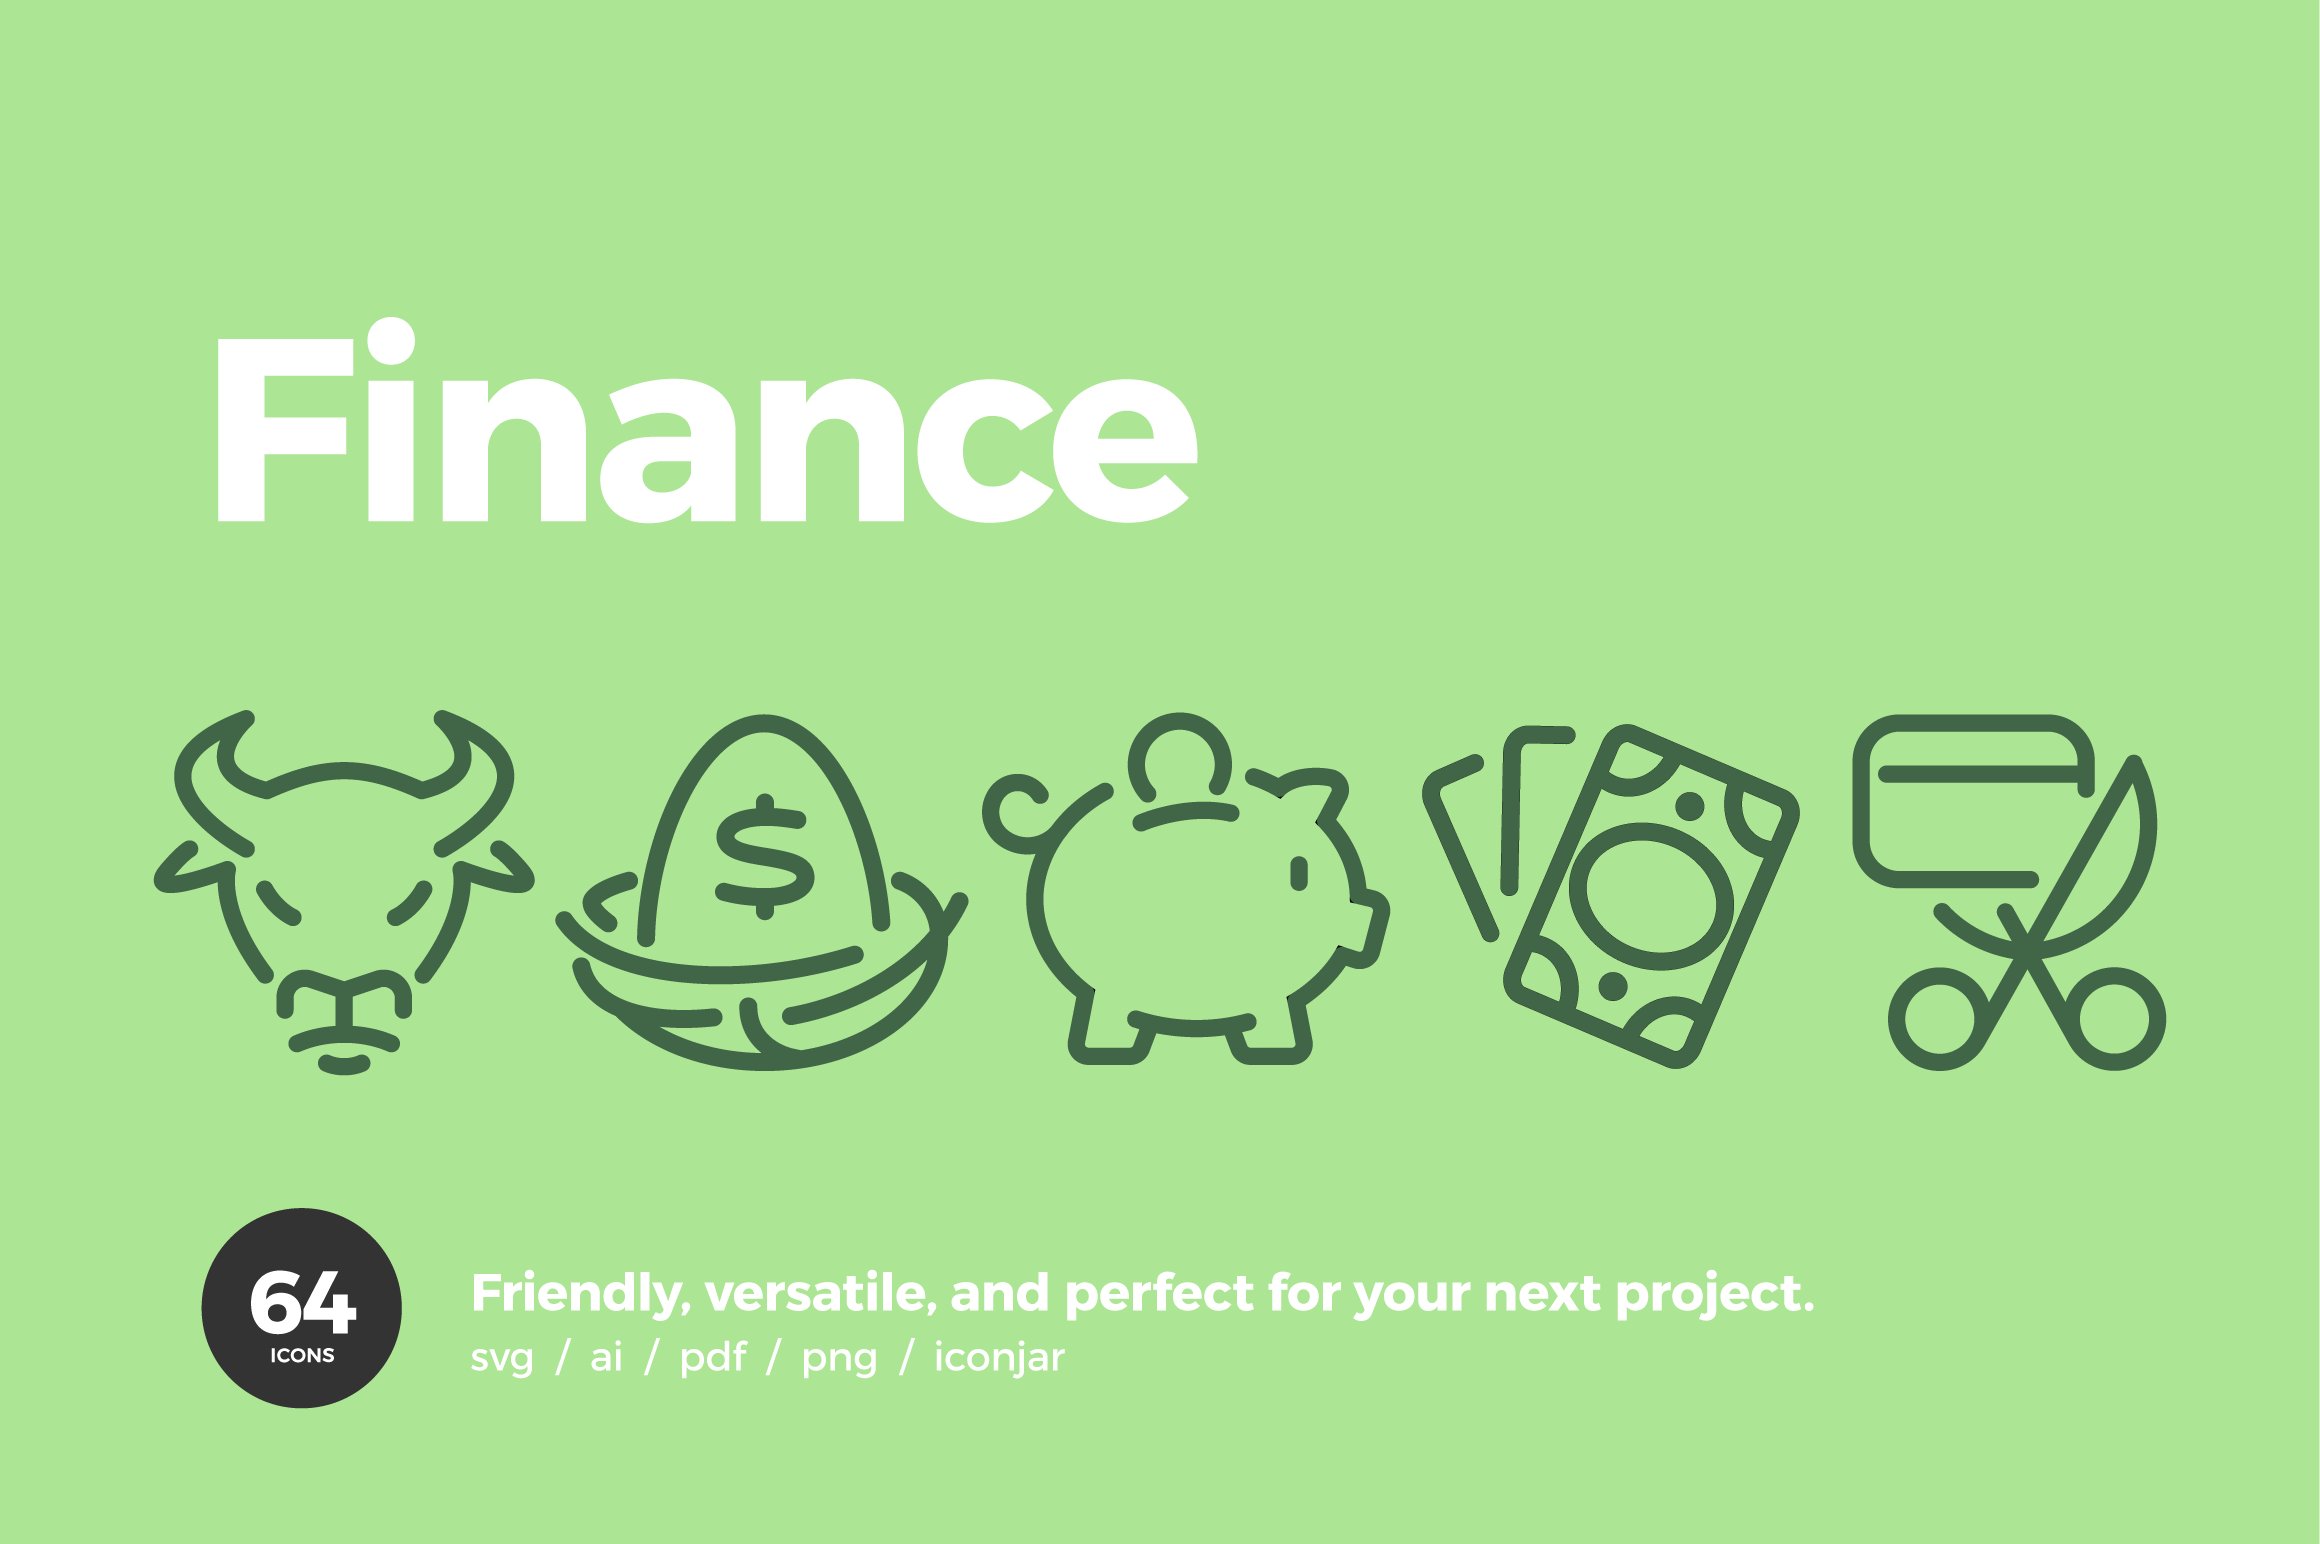 Finance Icons — Pixi Line cover image.